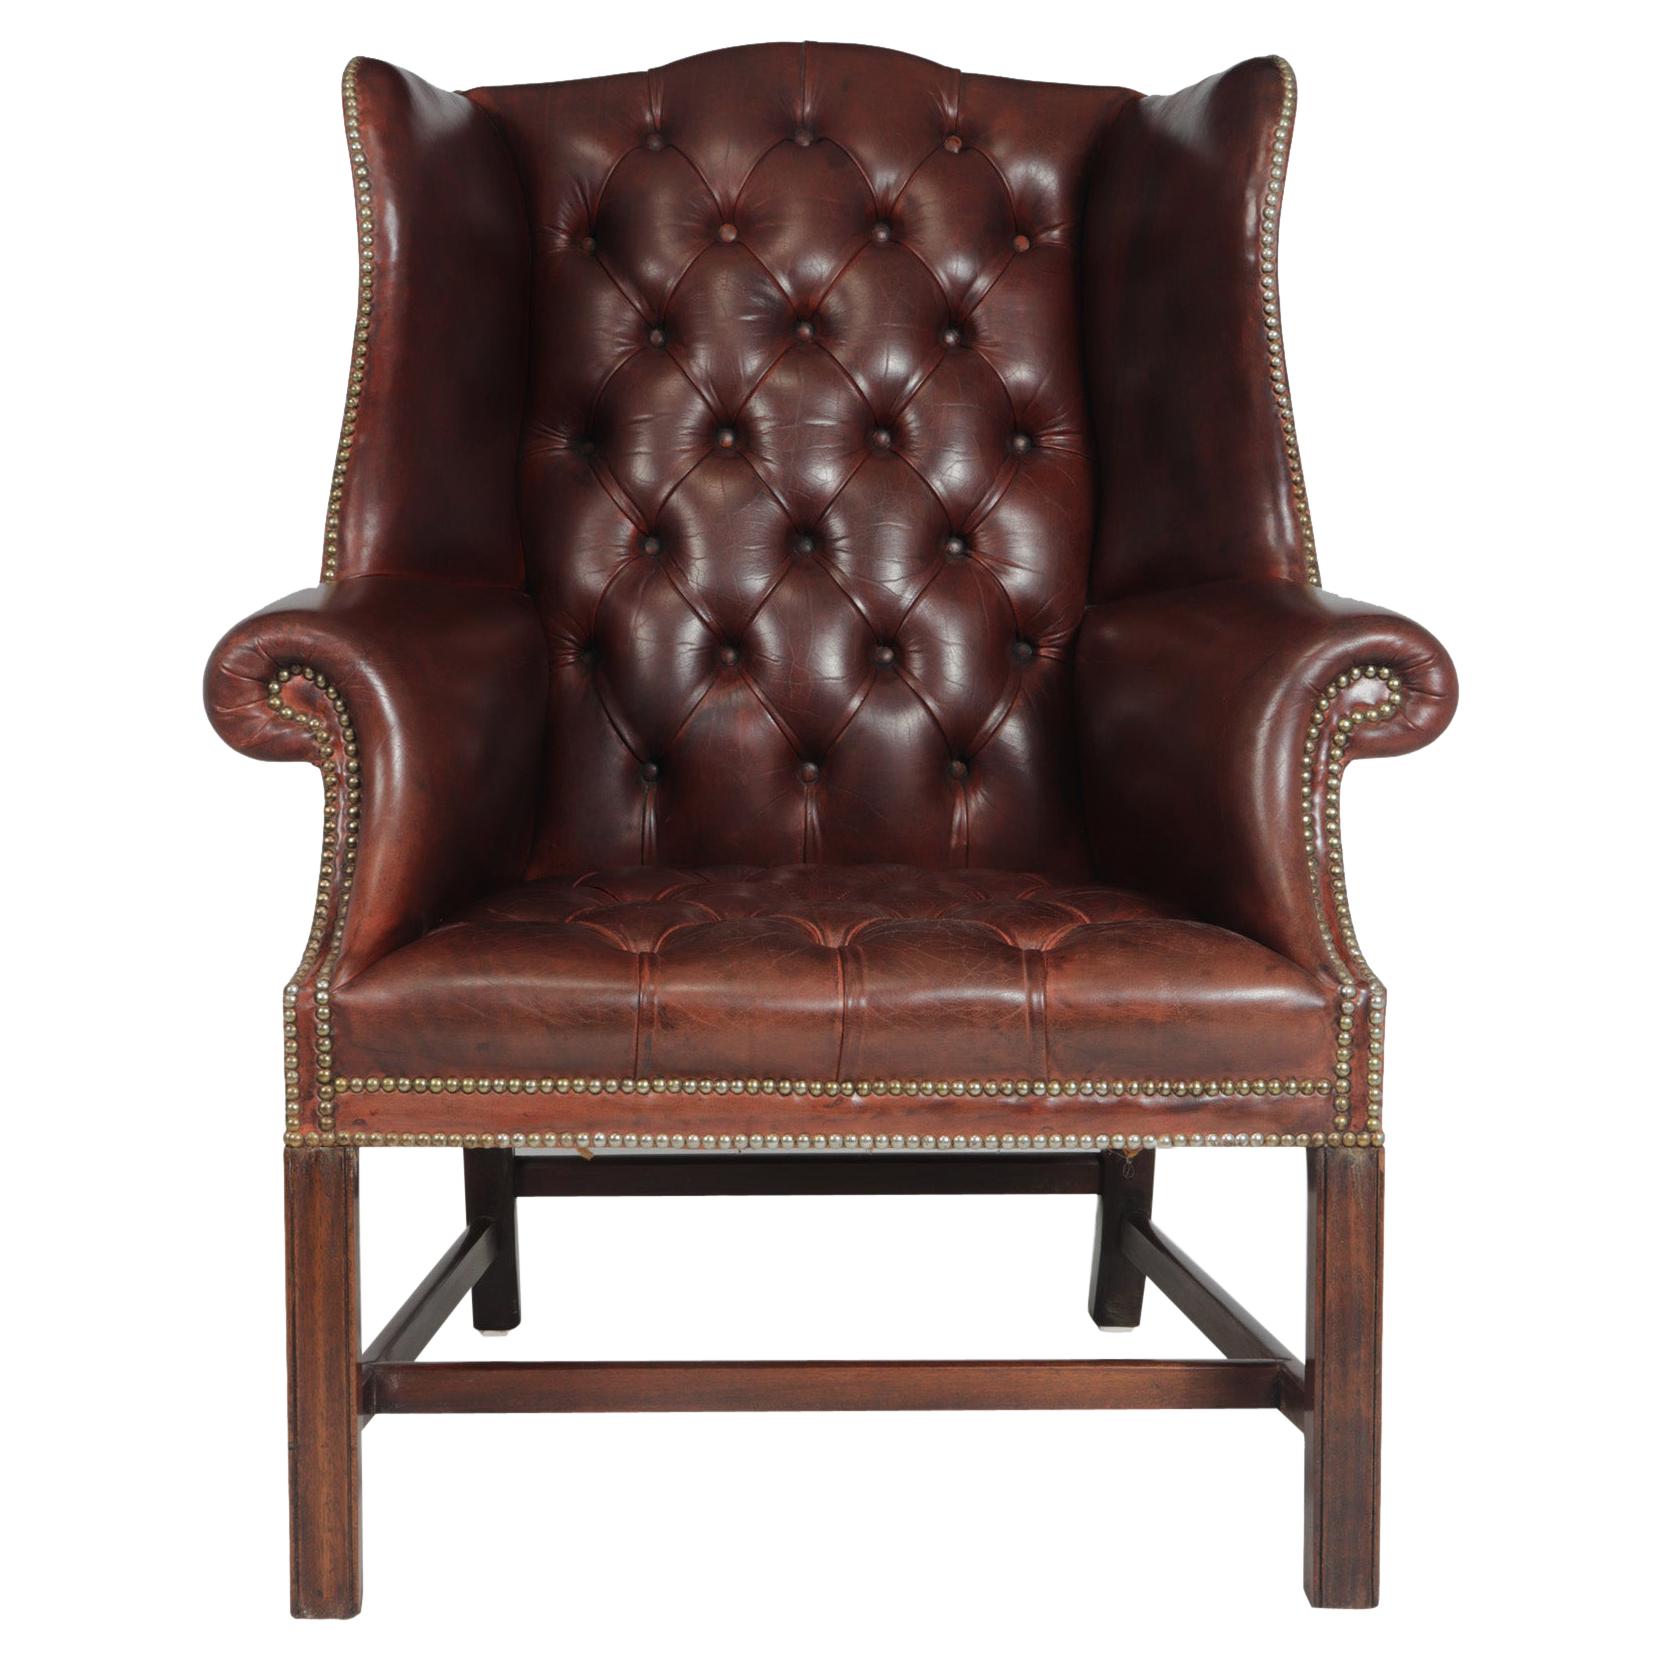 Georgian Style Buttoned Leather Wing Chair